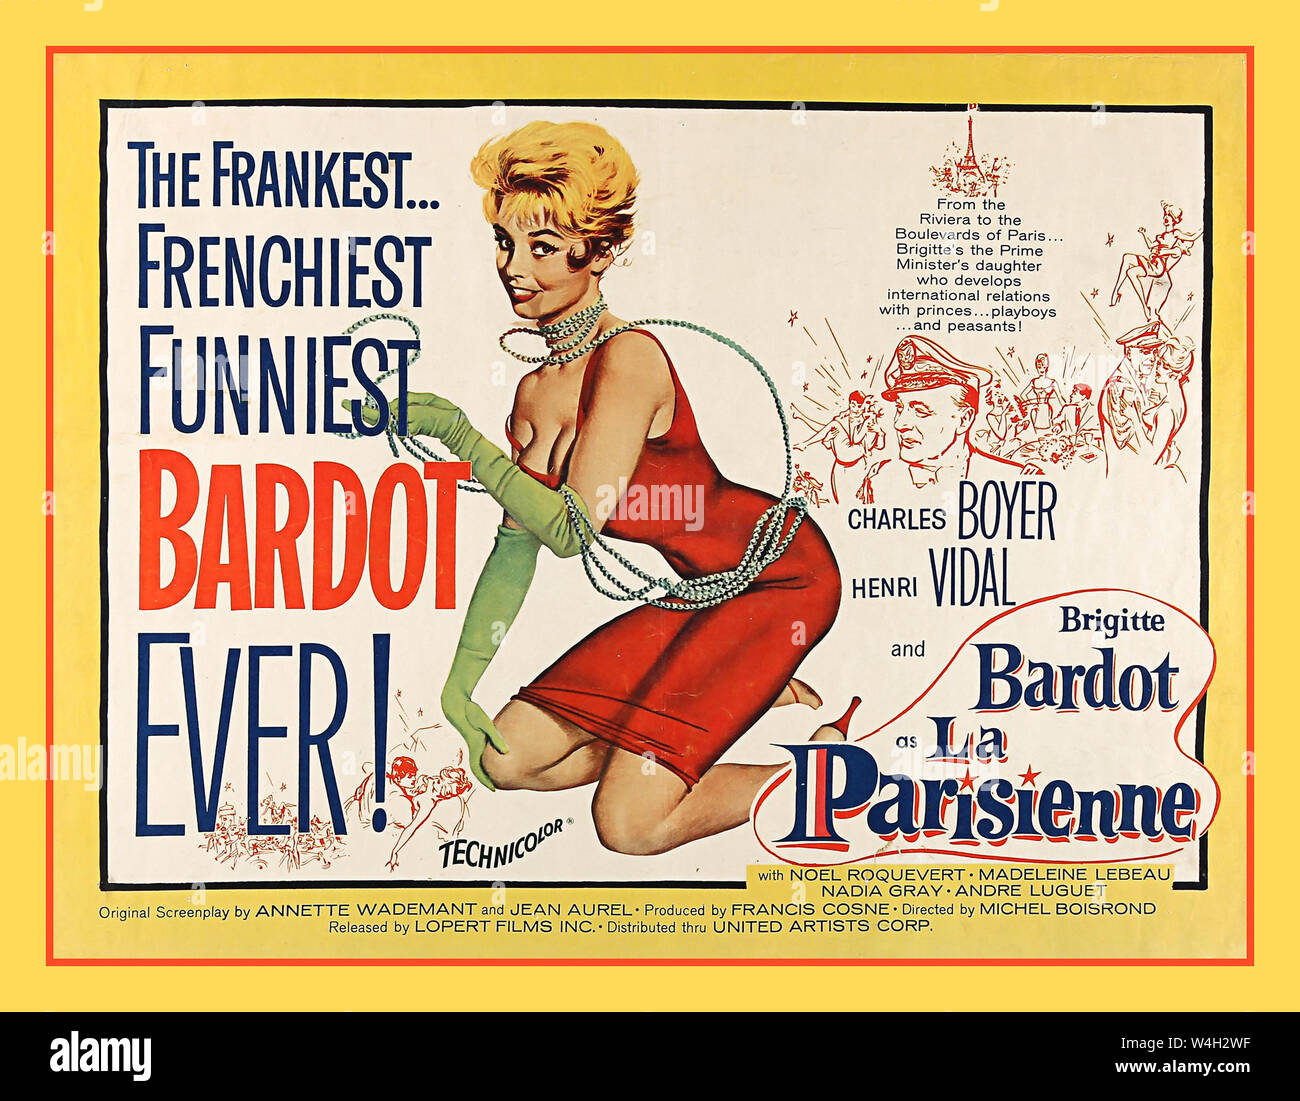 BARDOT LA PARISIENNE 1950’s USA vintage movie cinema film poster for the French comedy 'La Parisienne', released in America in 1958. The poster presents a coquettish image of the star Brigitte Bardot, also with Charles Boyer Henri Vidal Directed by Michel Boisrond Stock Photo